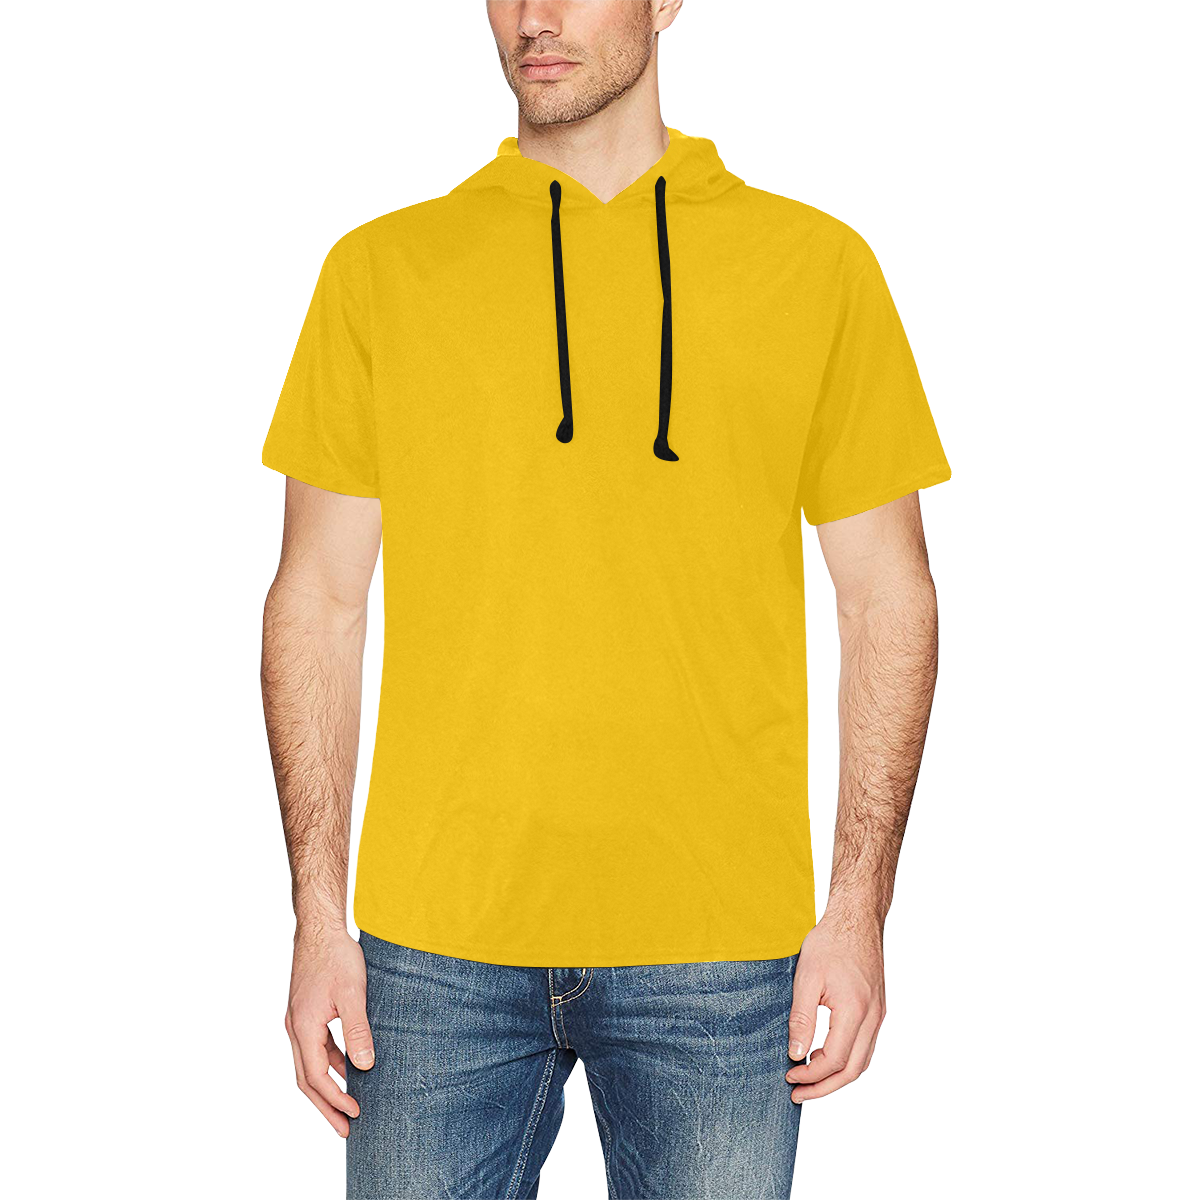 MBF hoodie yellow All Over Print Short Sleeve Hoodie for Men (Model H32)